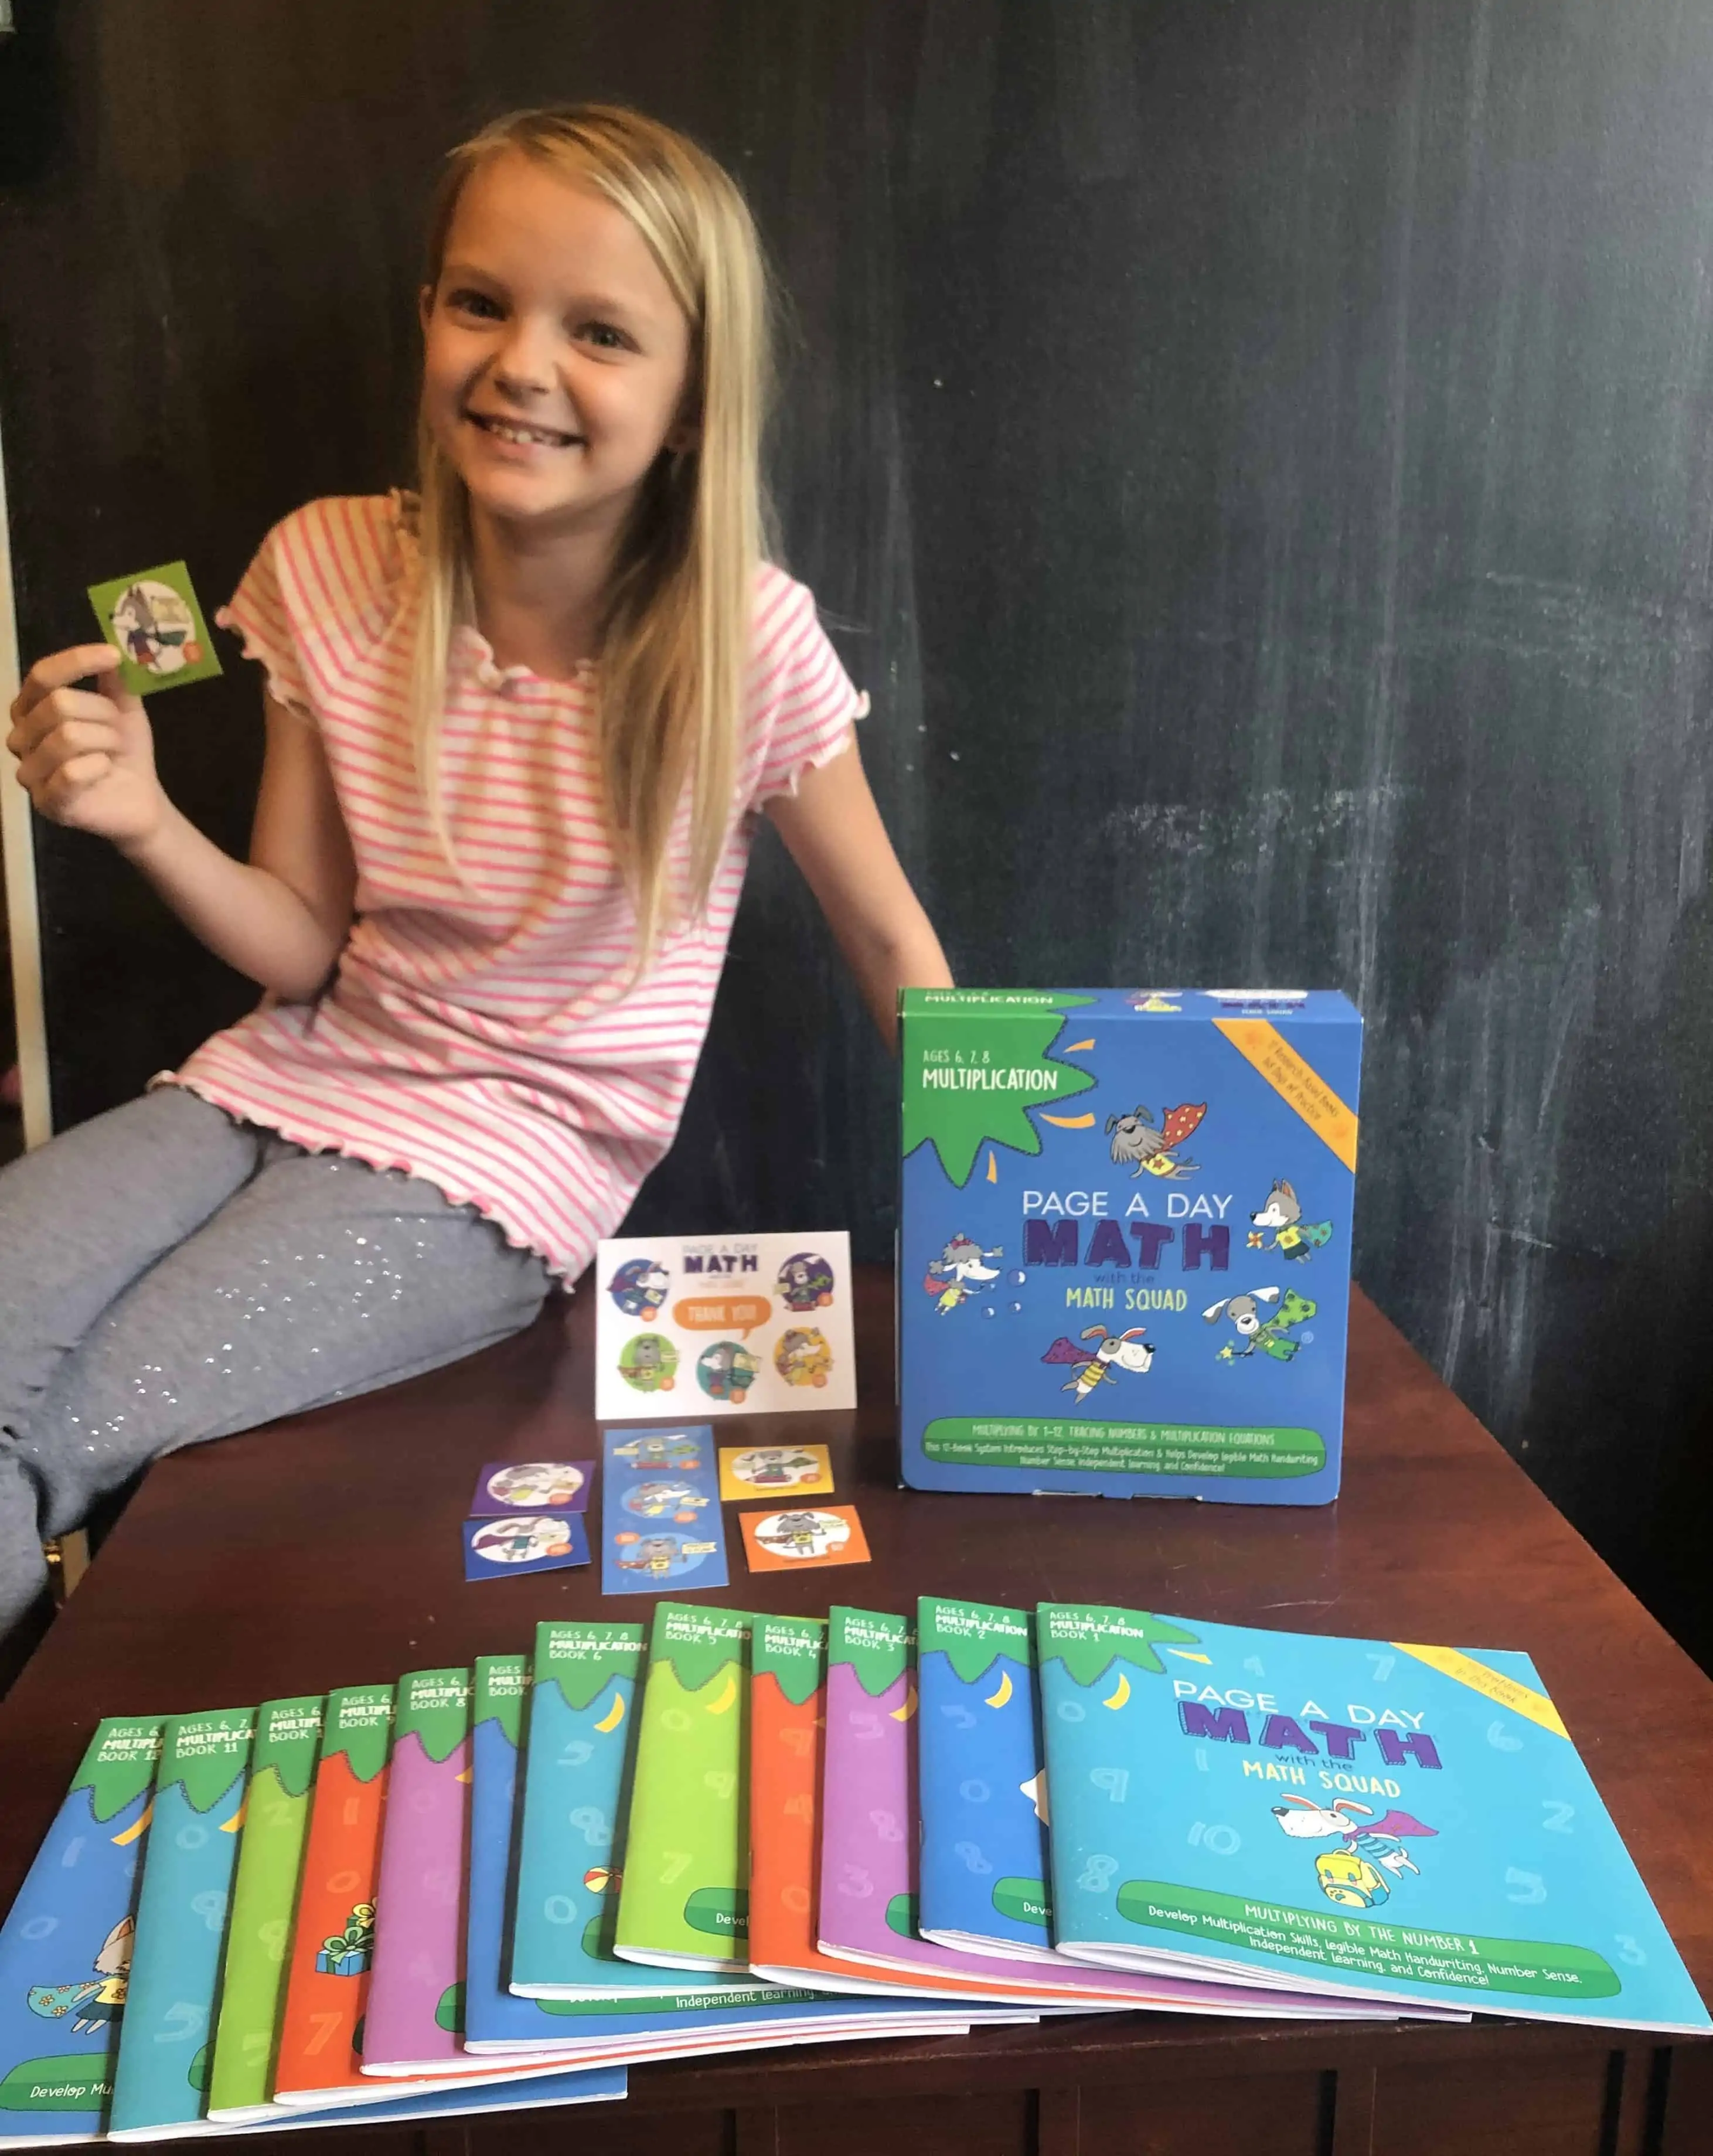 an image of a child holding a card and sitting on a table with a bunch of One Page a Day Math books shown in front of her as an example